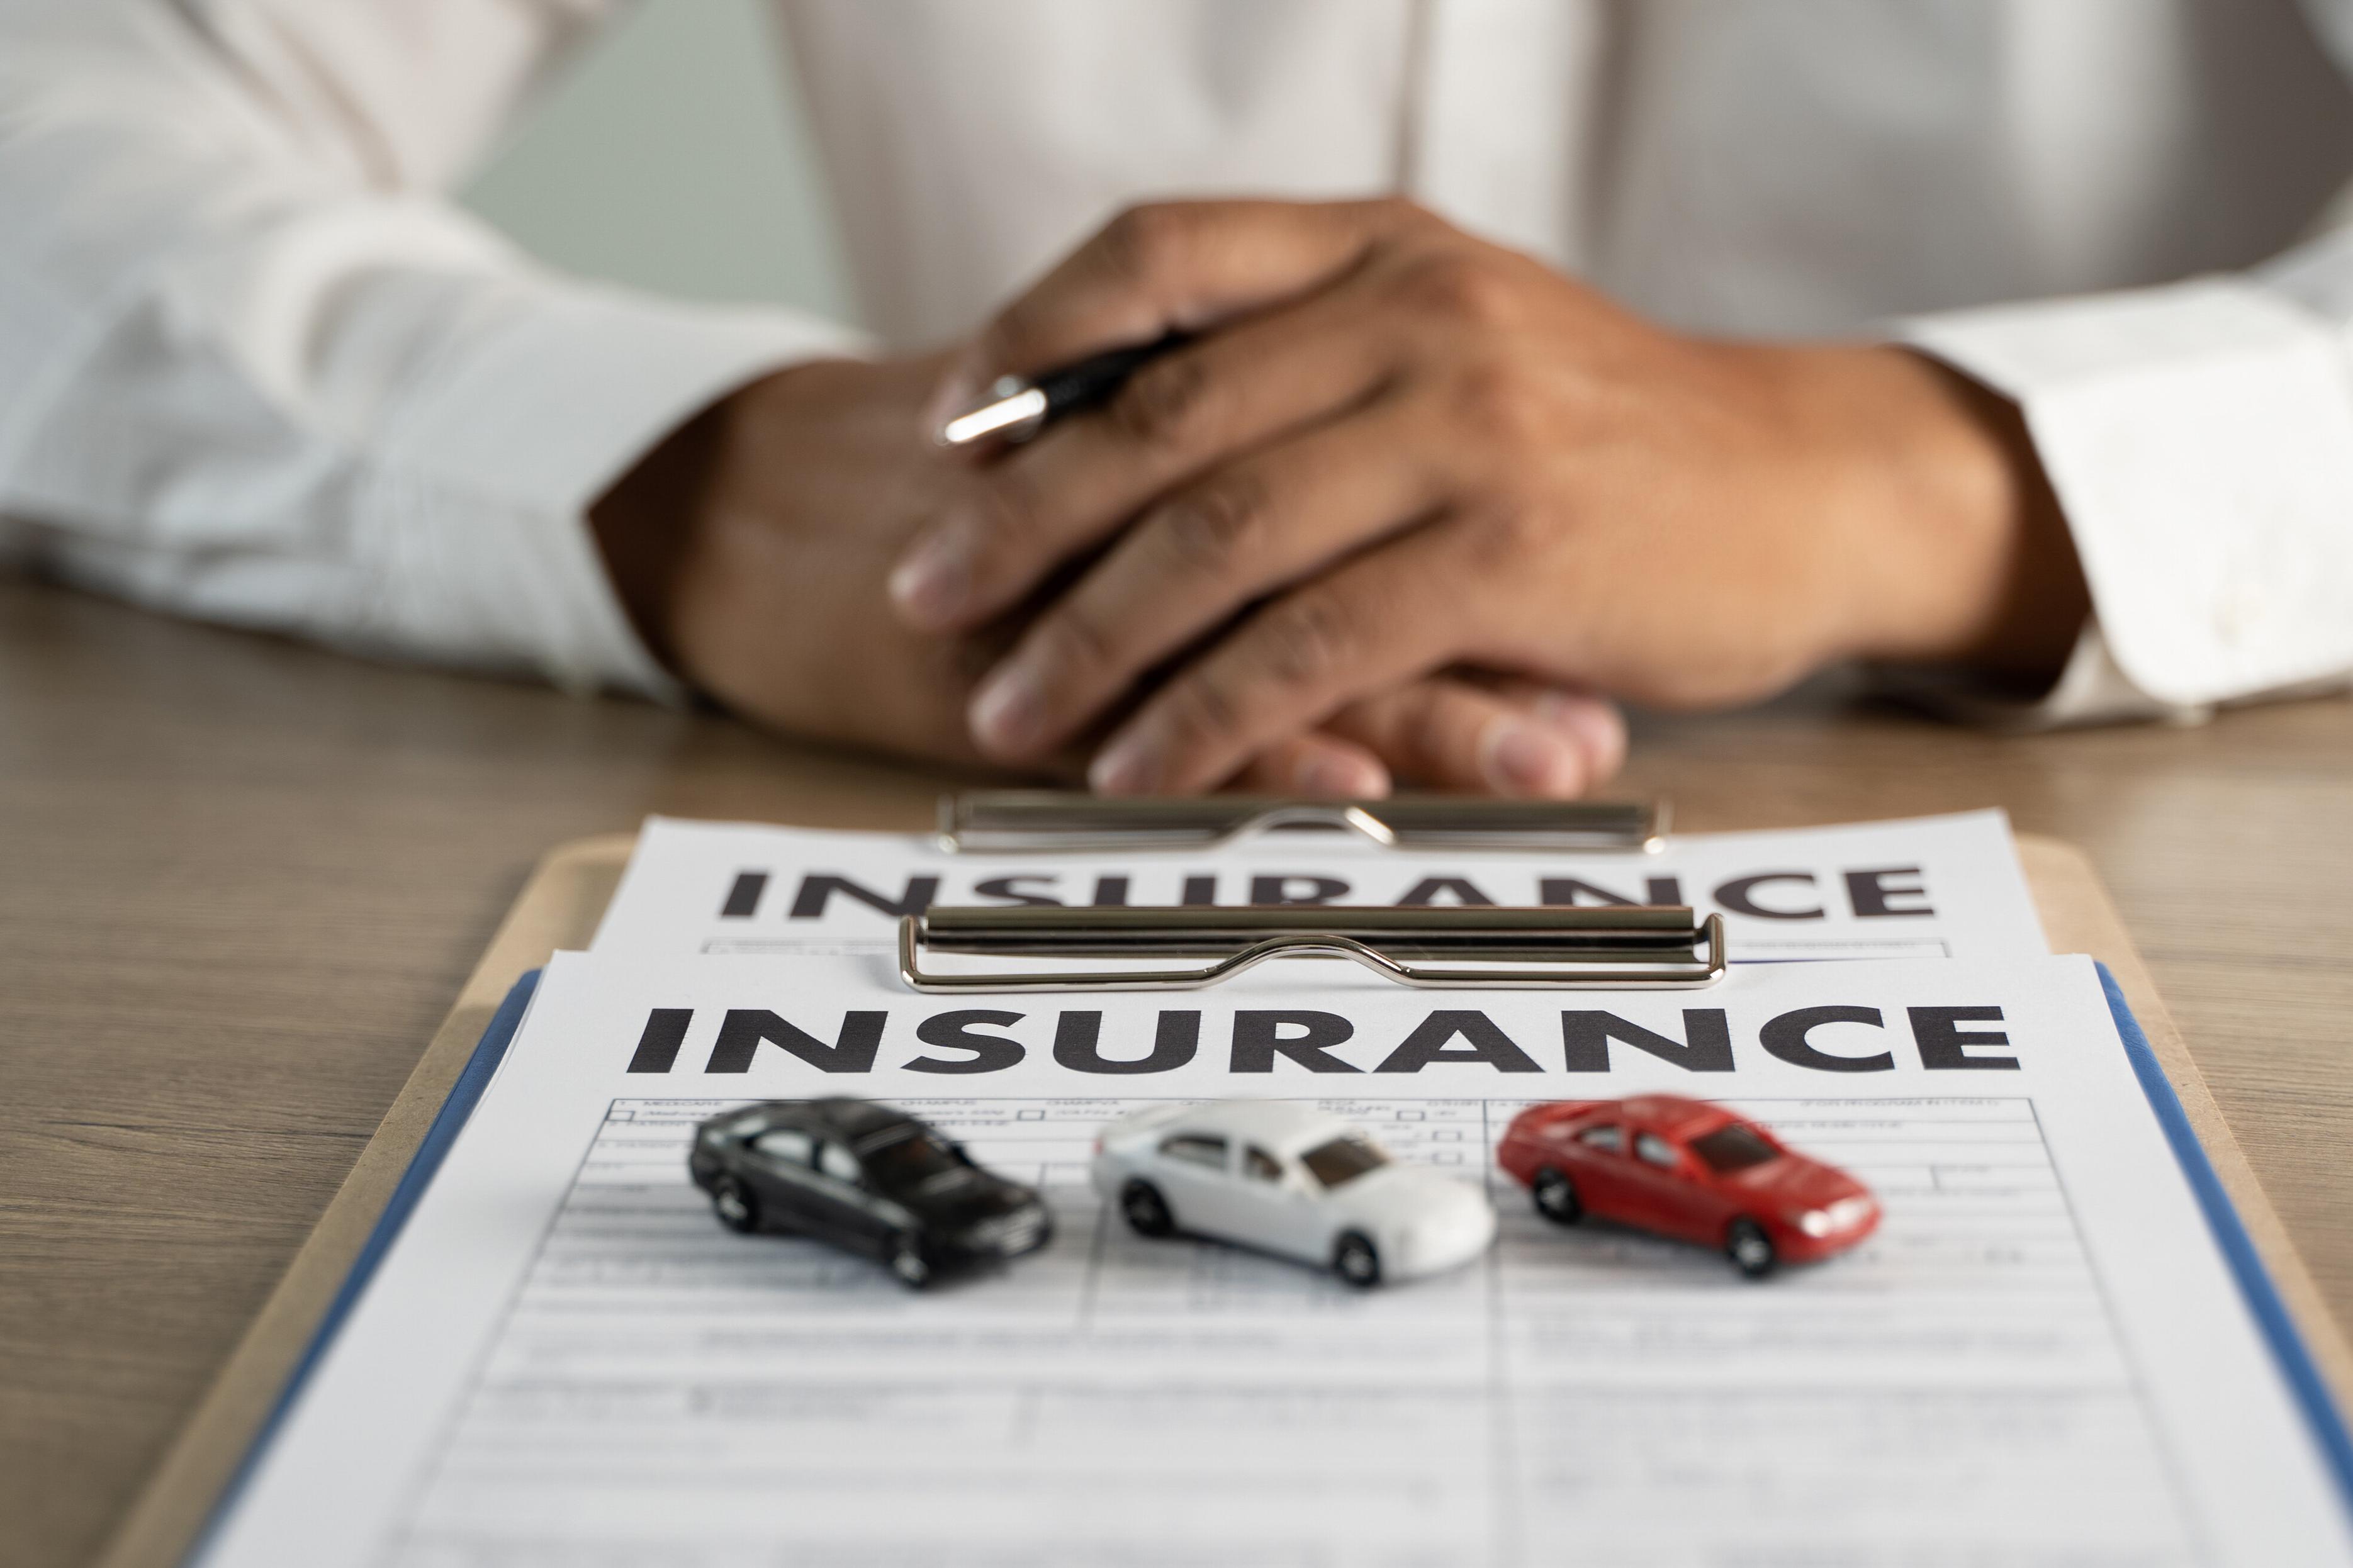 99% of Drivers Overpay for Car Insurance - Are You One of Them?